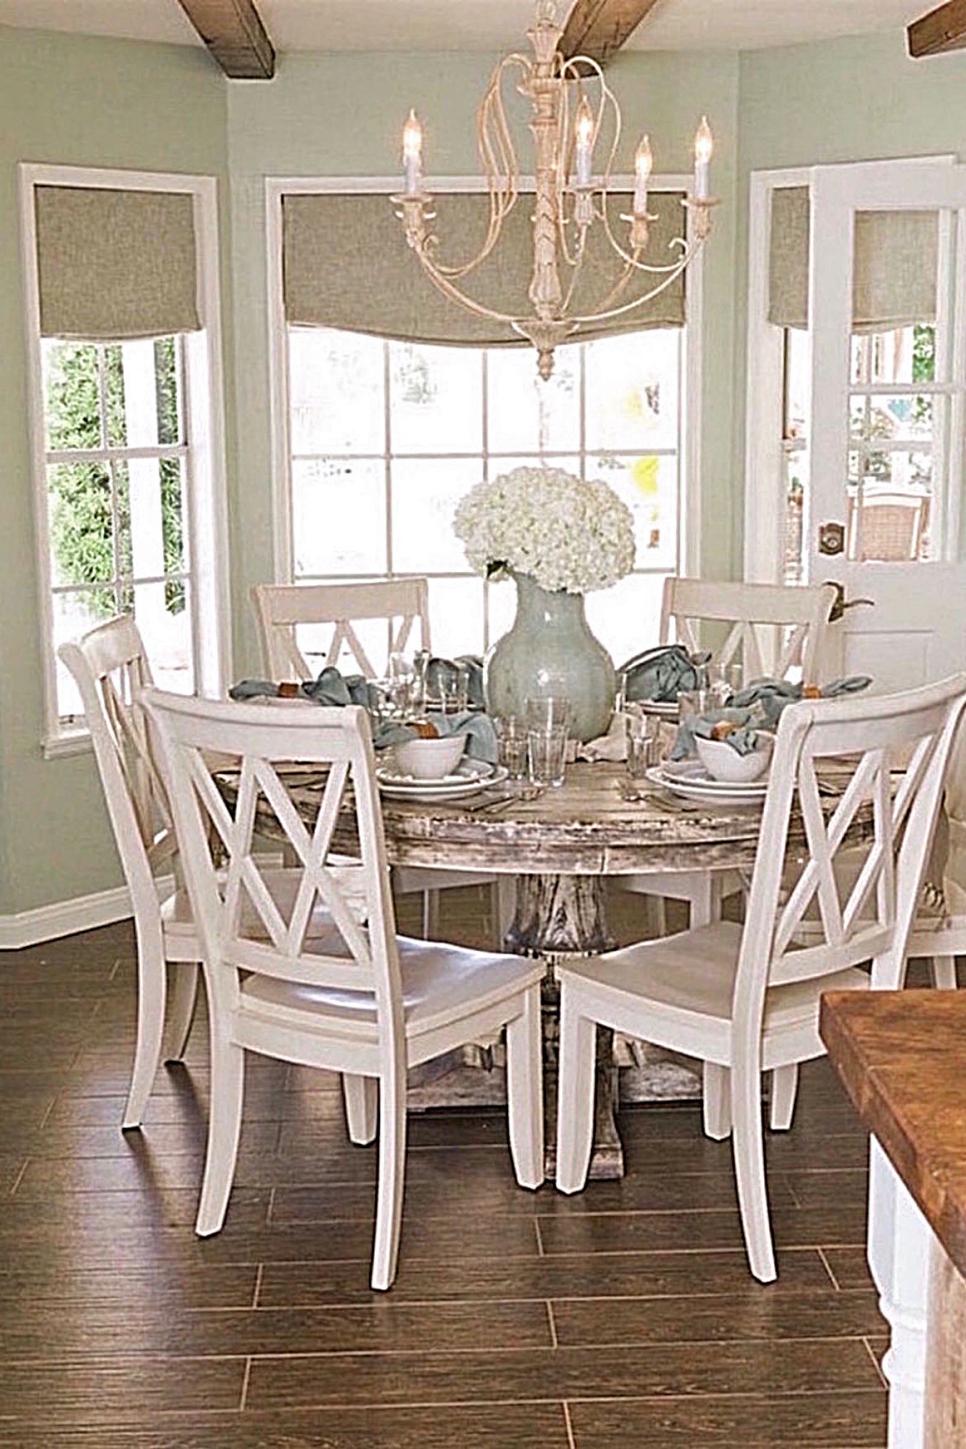 Eat-In Country Kitchen With Round Dining Table and Hardwood Floors | HGTV